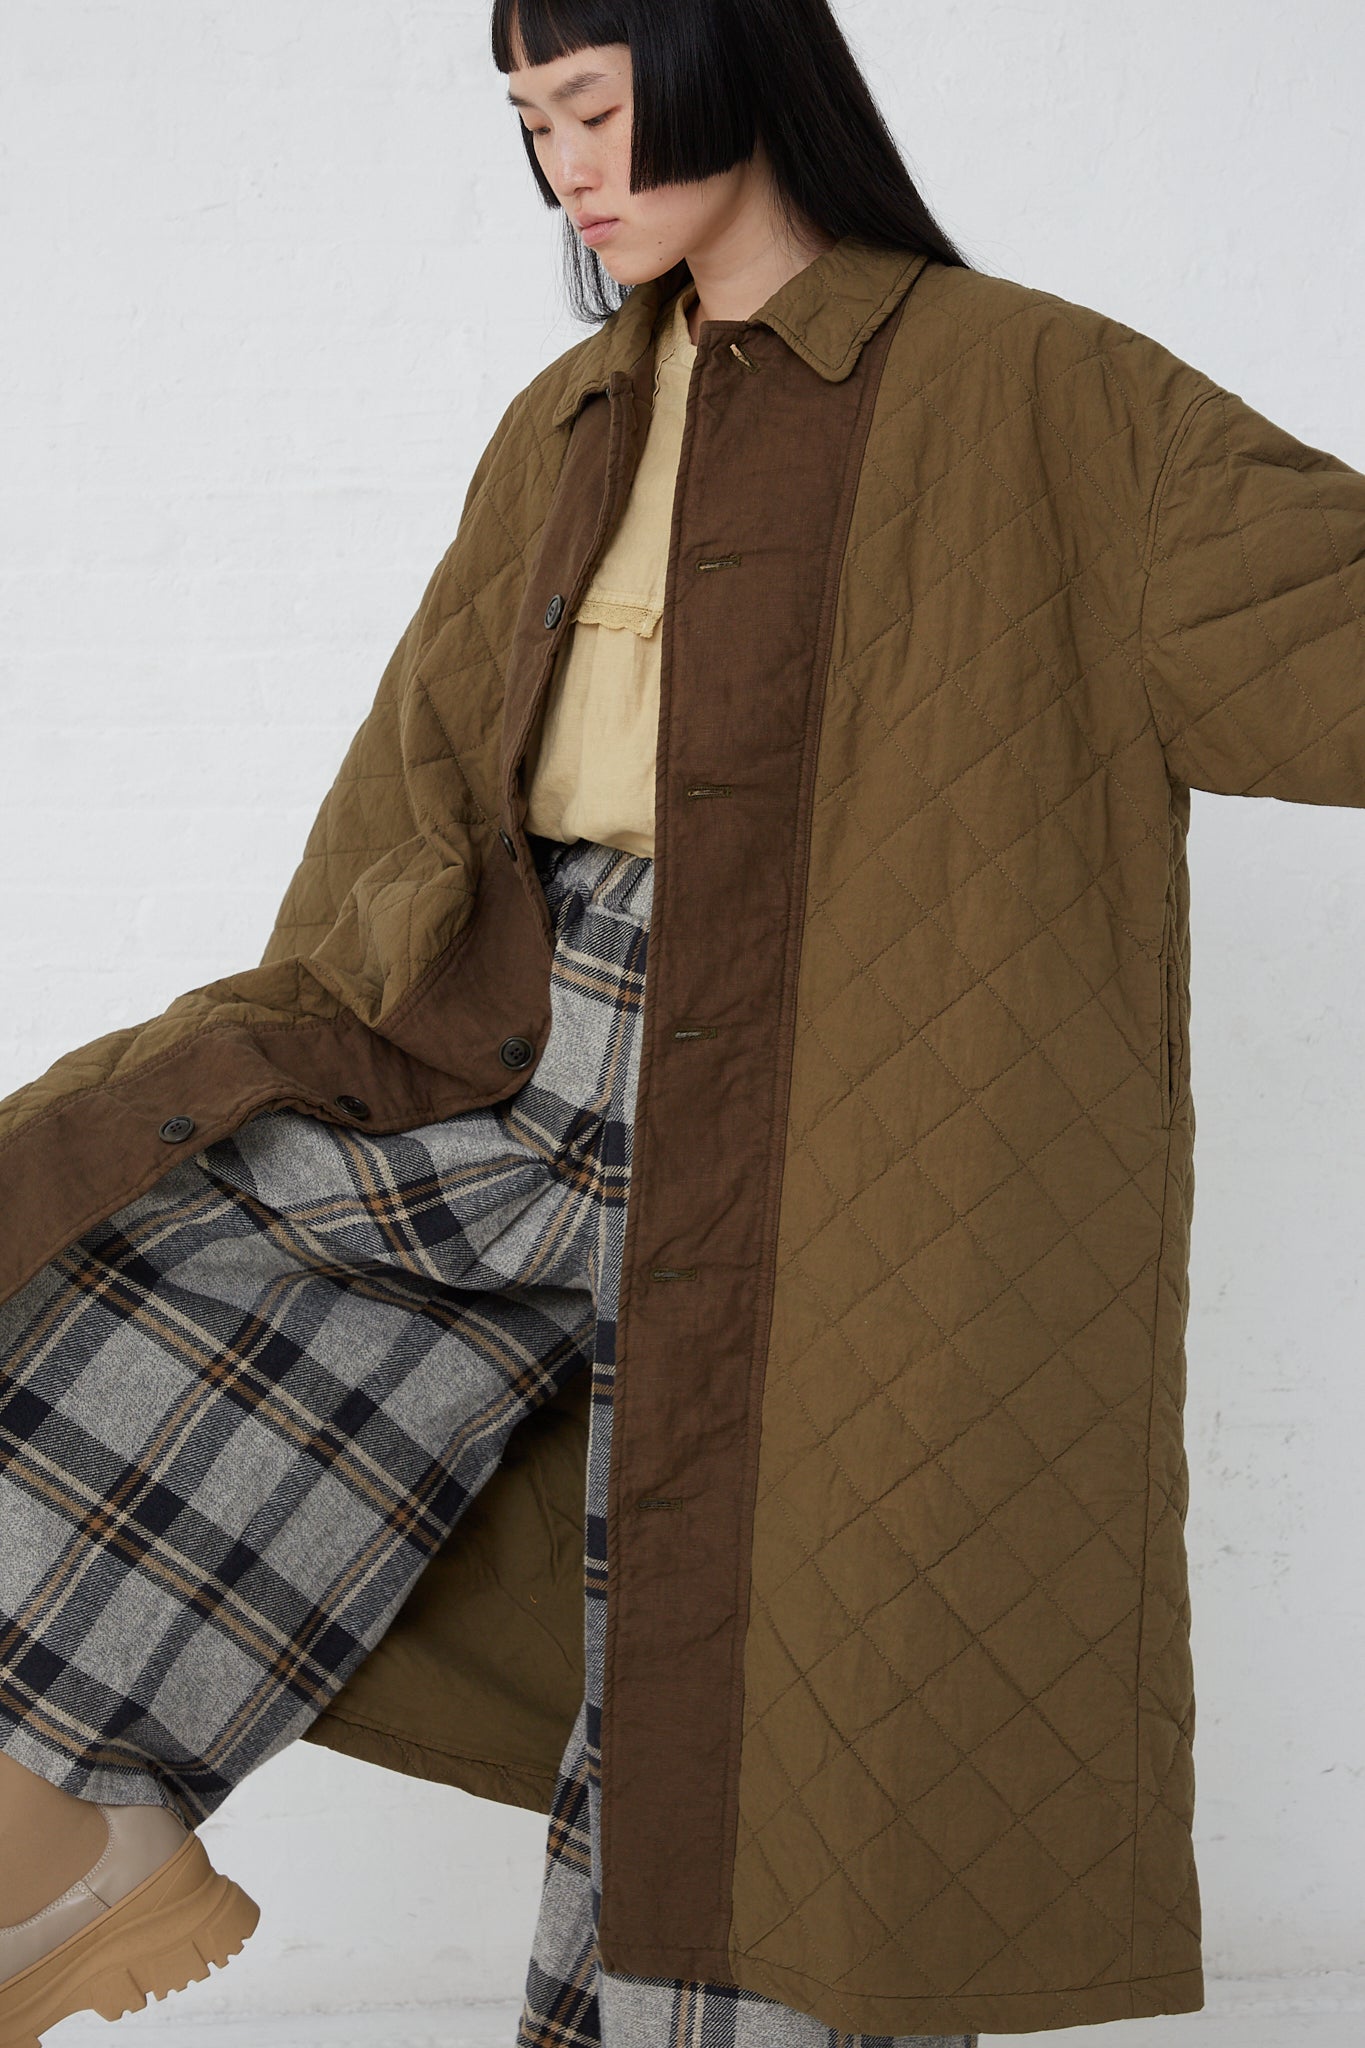 A woman wearing the "Cotton Ramie Quilted Long Coat in Olive" by nest Robe.